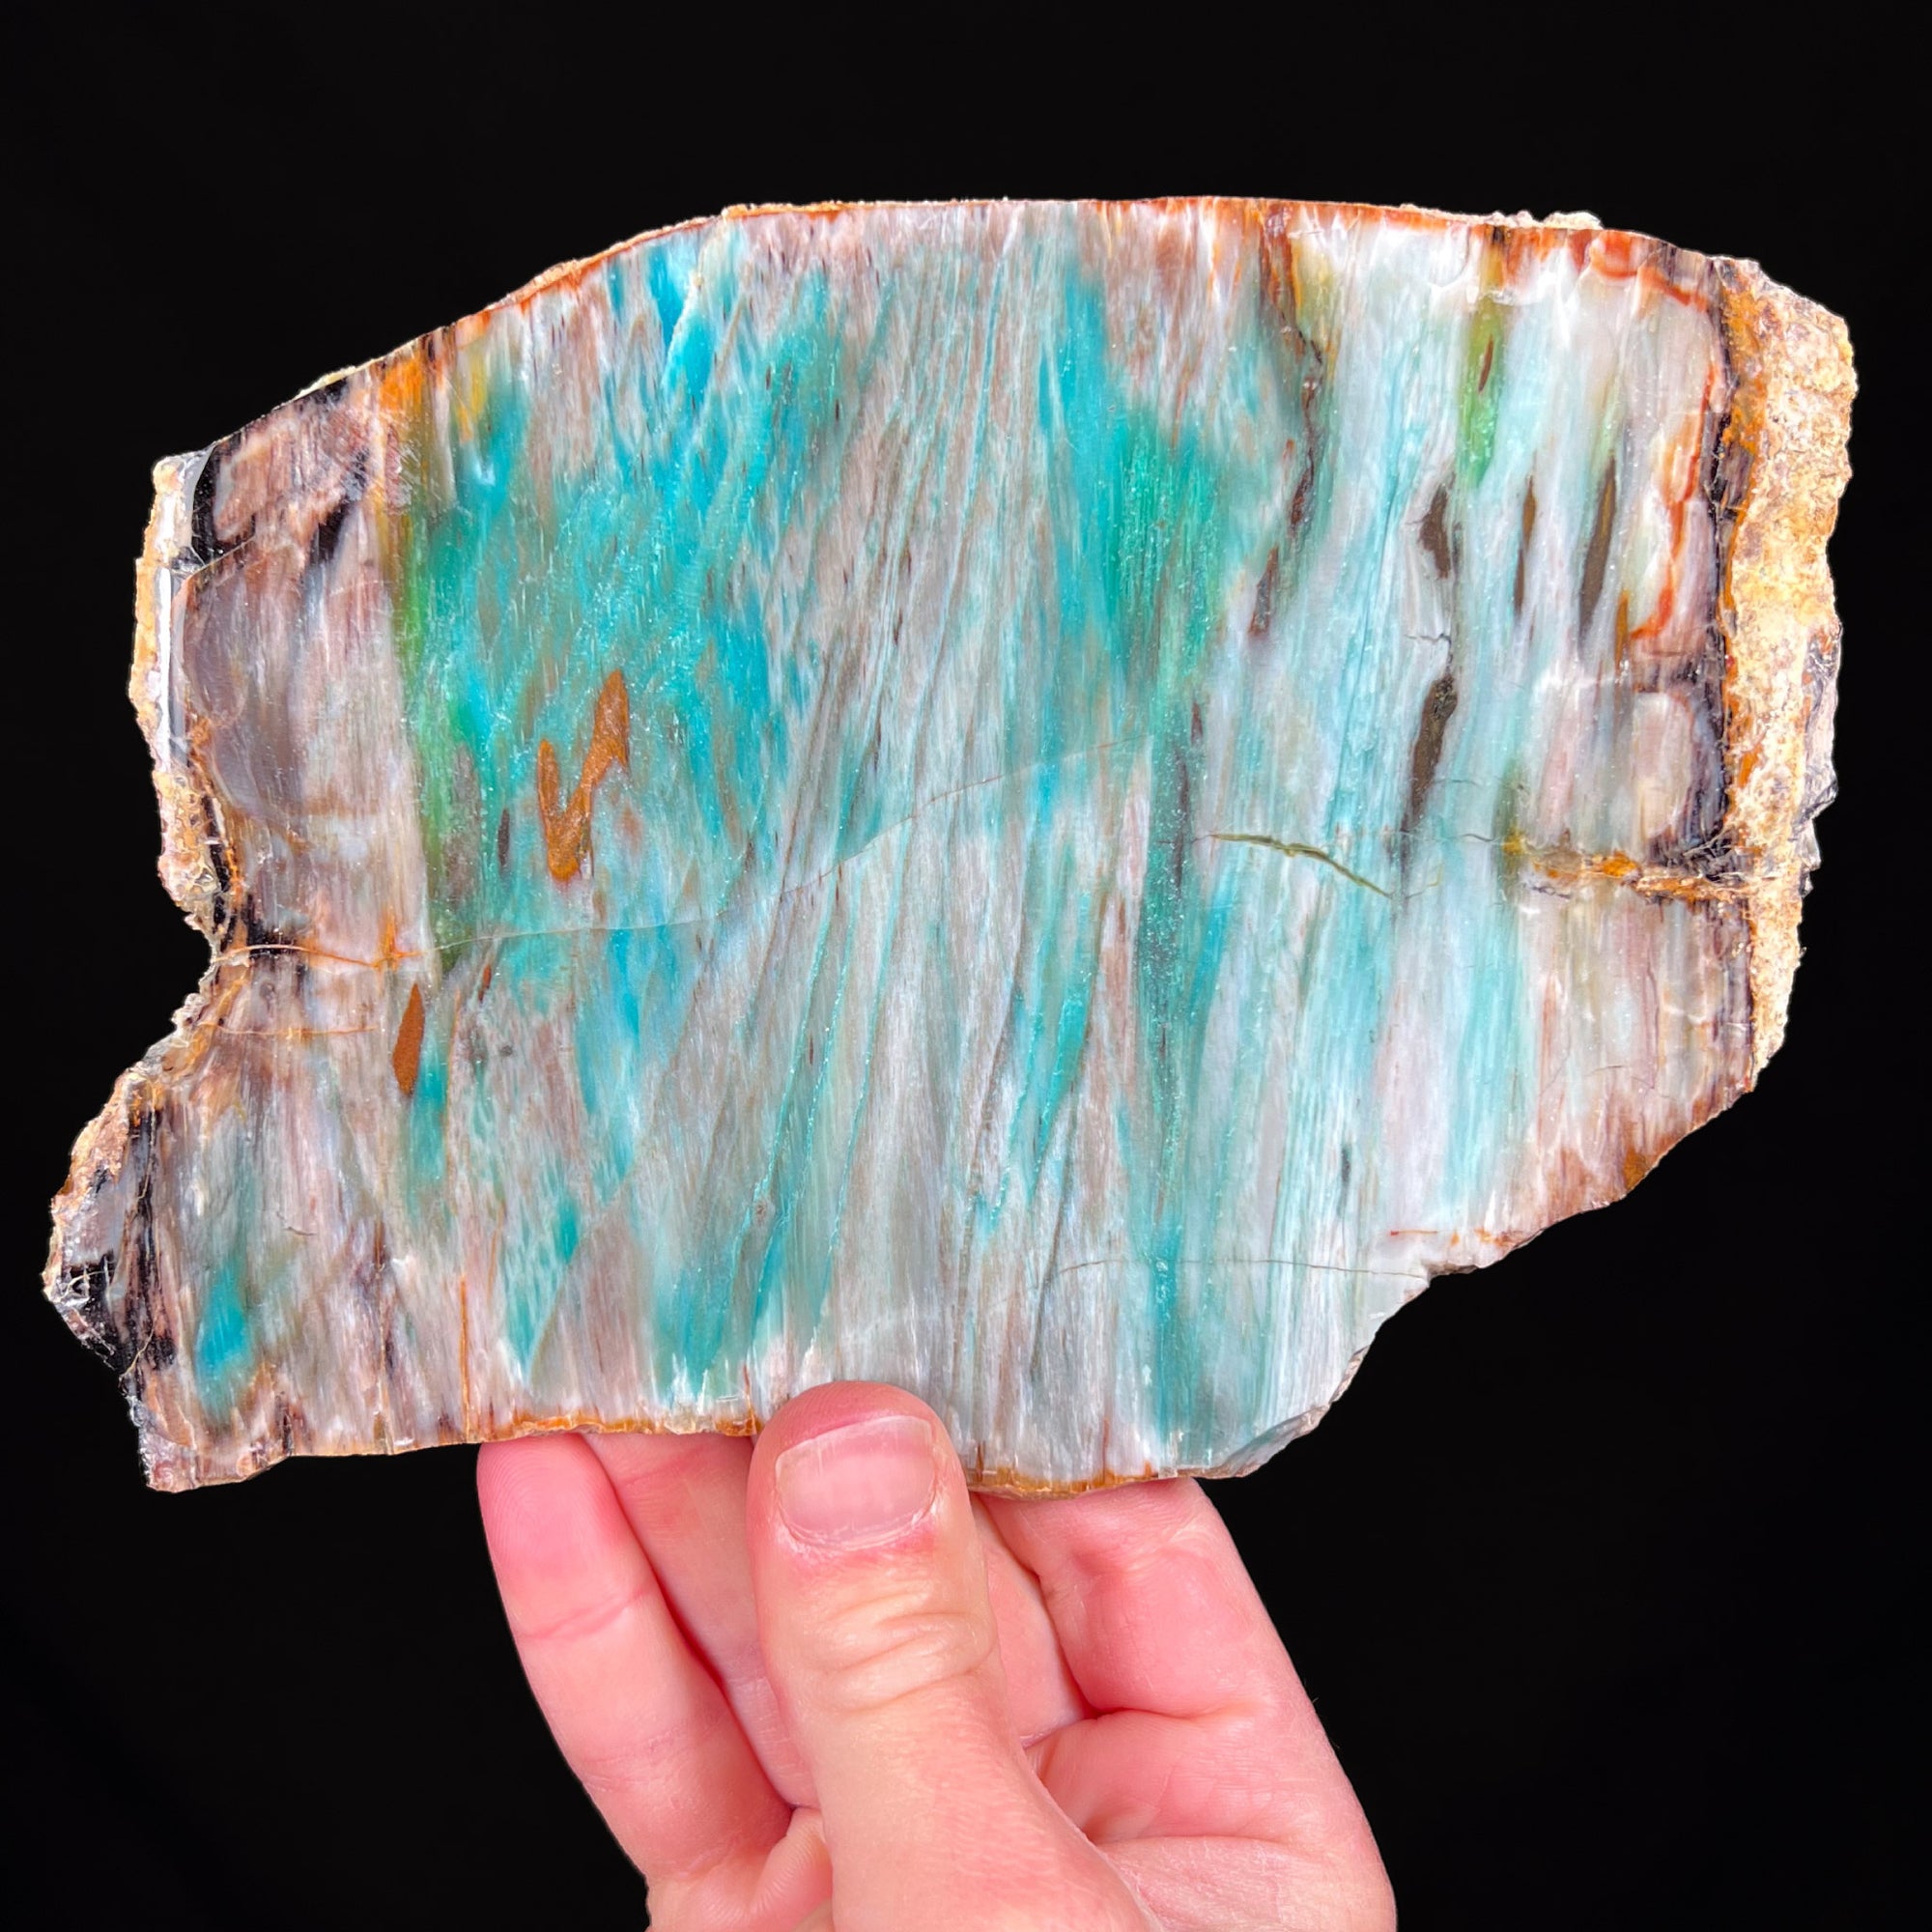 Petrified Wood with Copper Minerals from Turkey